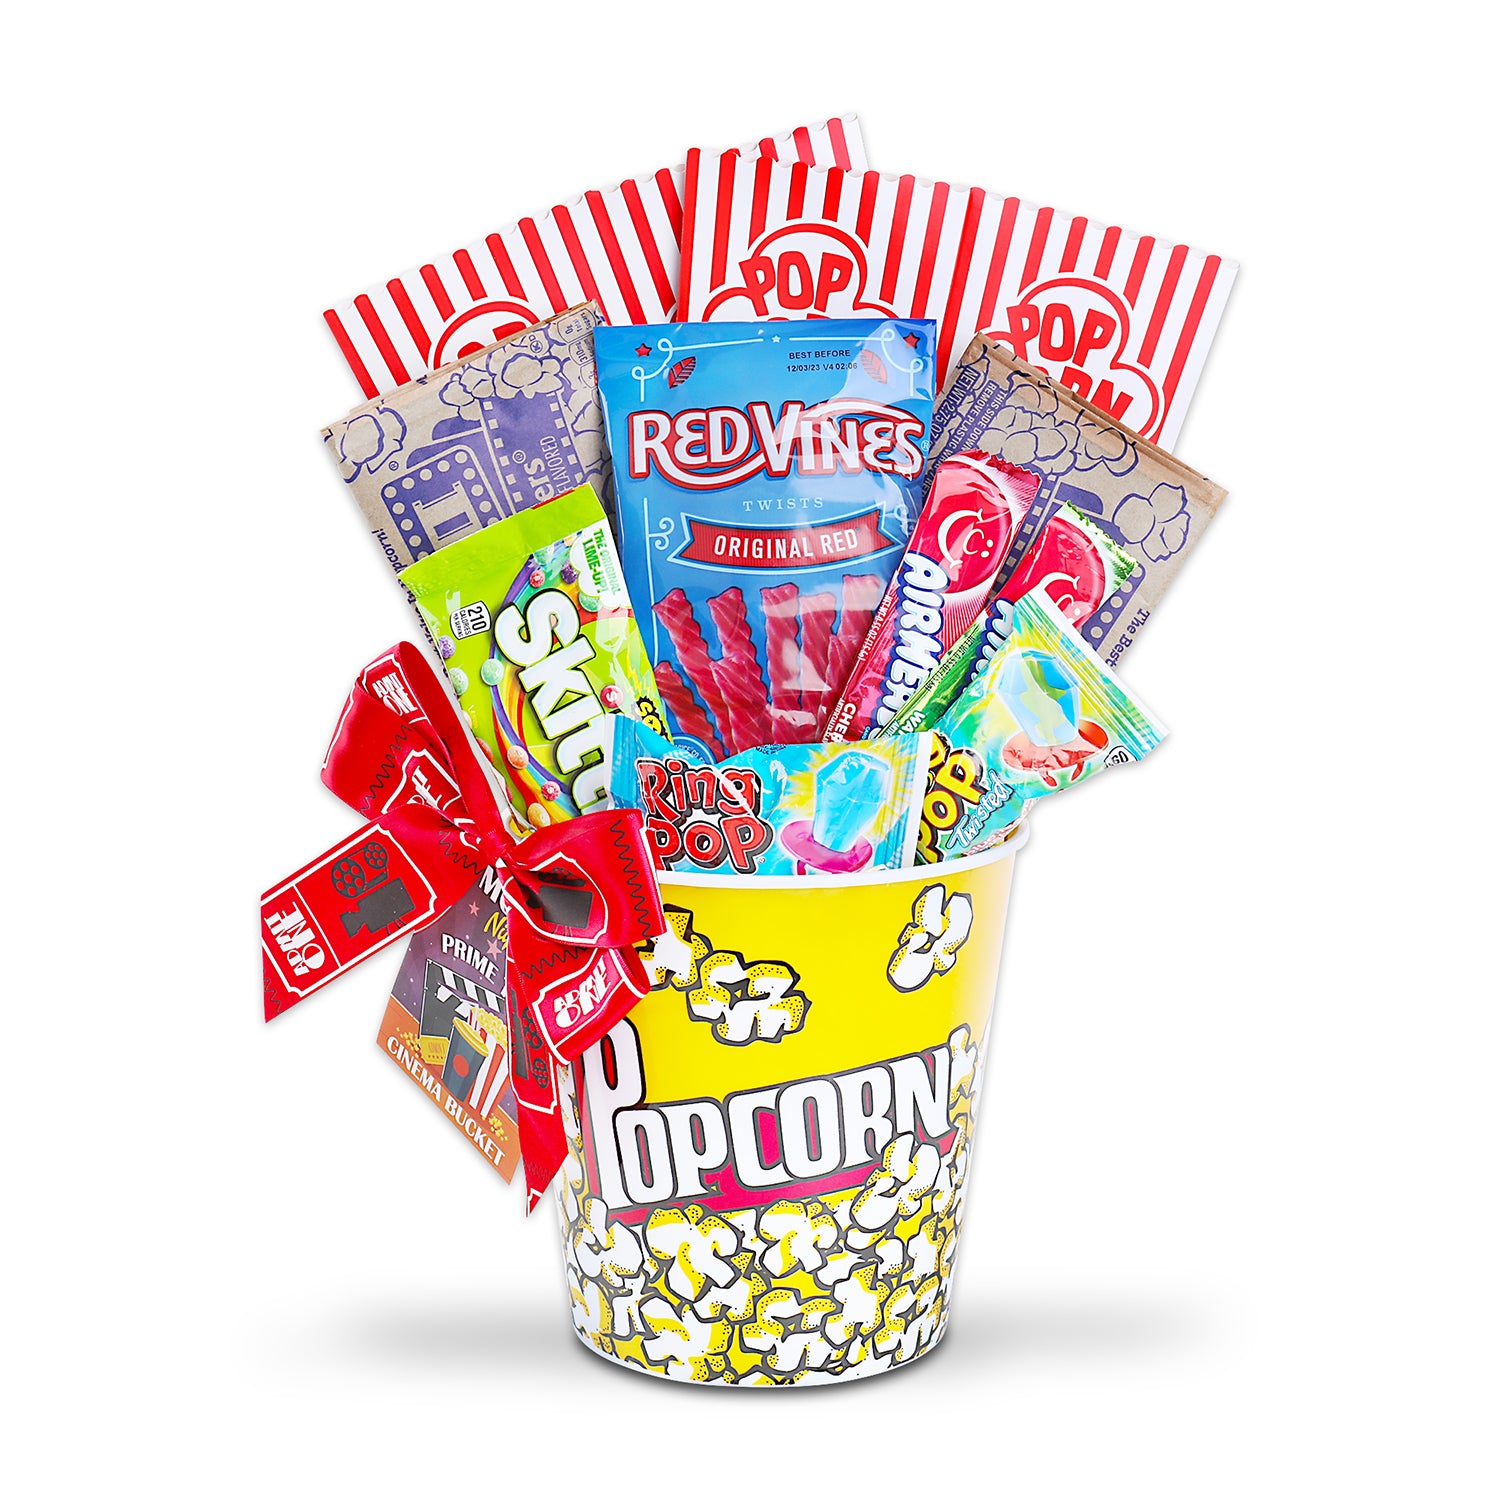 Plastic Popcorn Bucket, Ring Pop Assorted Flavors (2pcs), Act II Microwaveable Popcorn (2pcs), Red Vines (4oz), Sour Skittles (1.8oz), 2pcs Airheads Assorted Flavors (1.1oz), Original Tootsie Roll Bank with Candy (4oz.), 2 Popcorn Scoop contents displayed in bucket